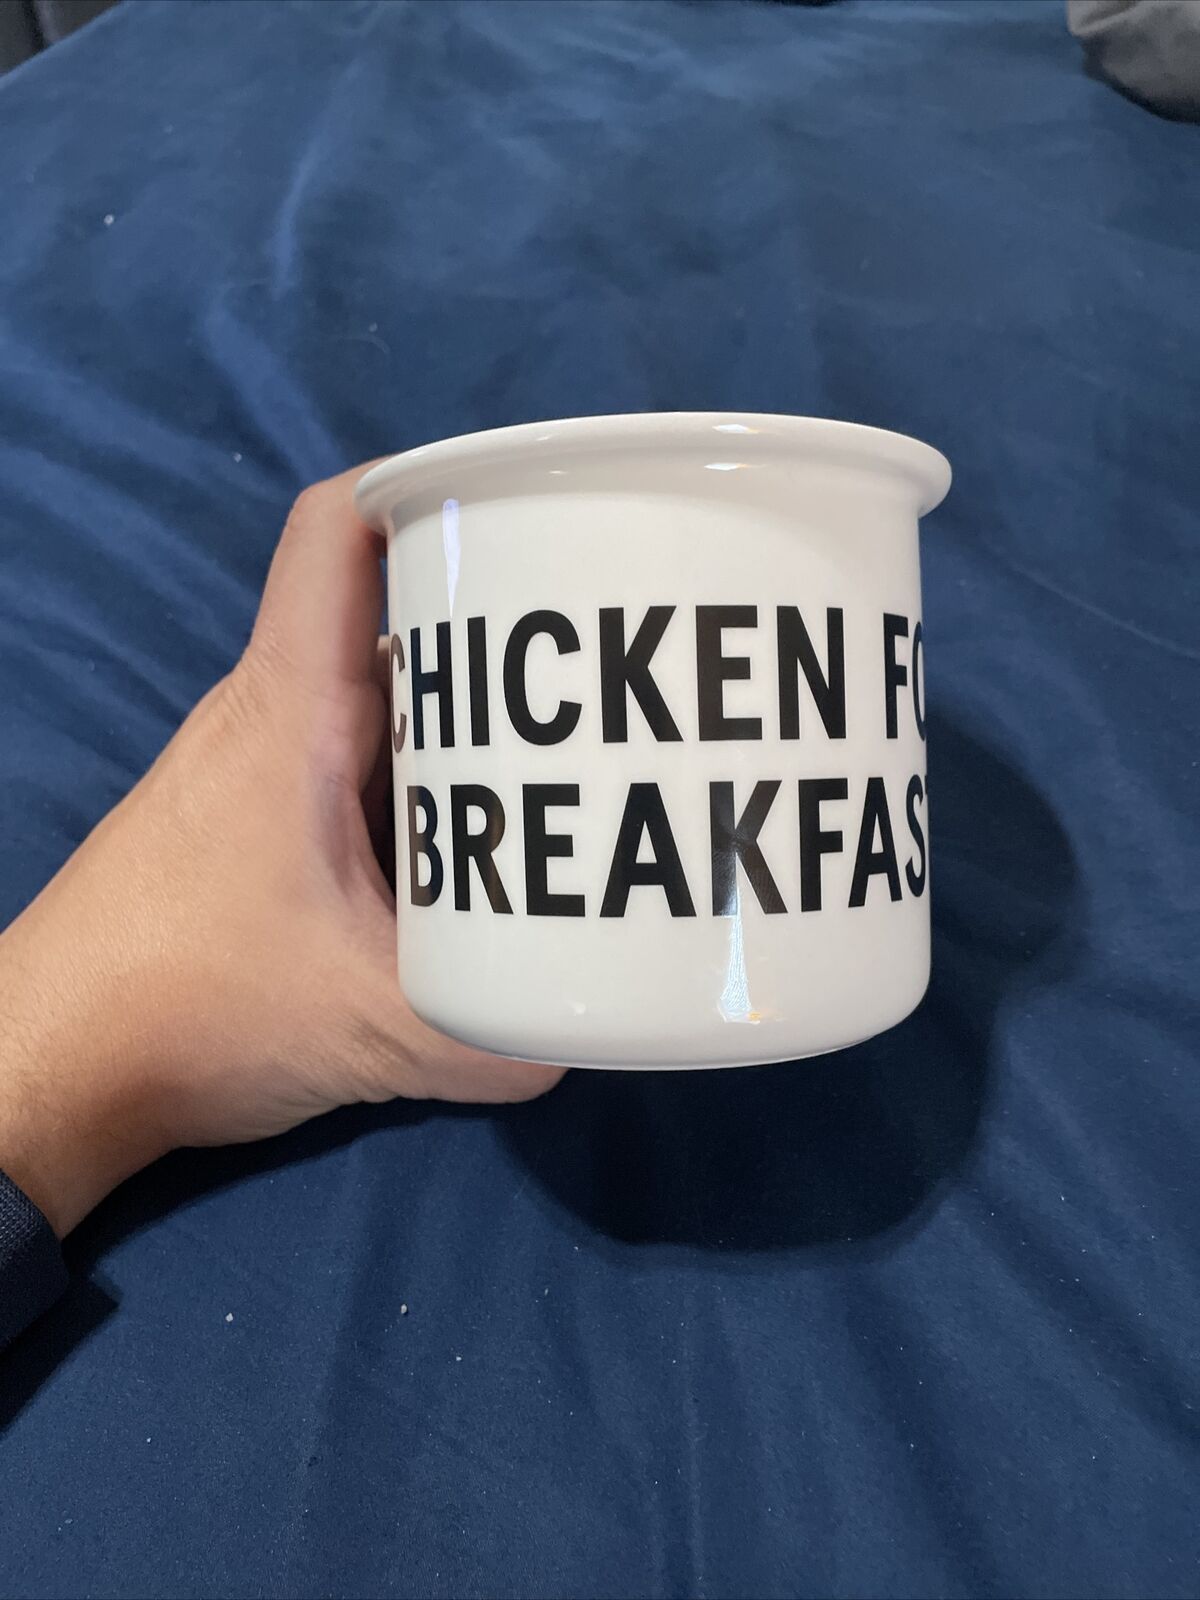 Chick-Fil-A Chicken For Breakfast Mug Limited Edition Heritage Collection Mug